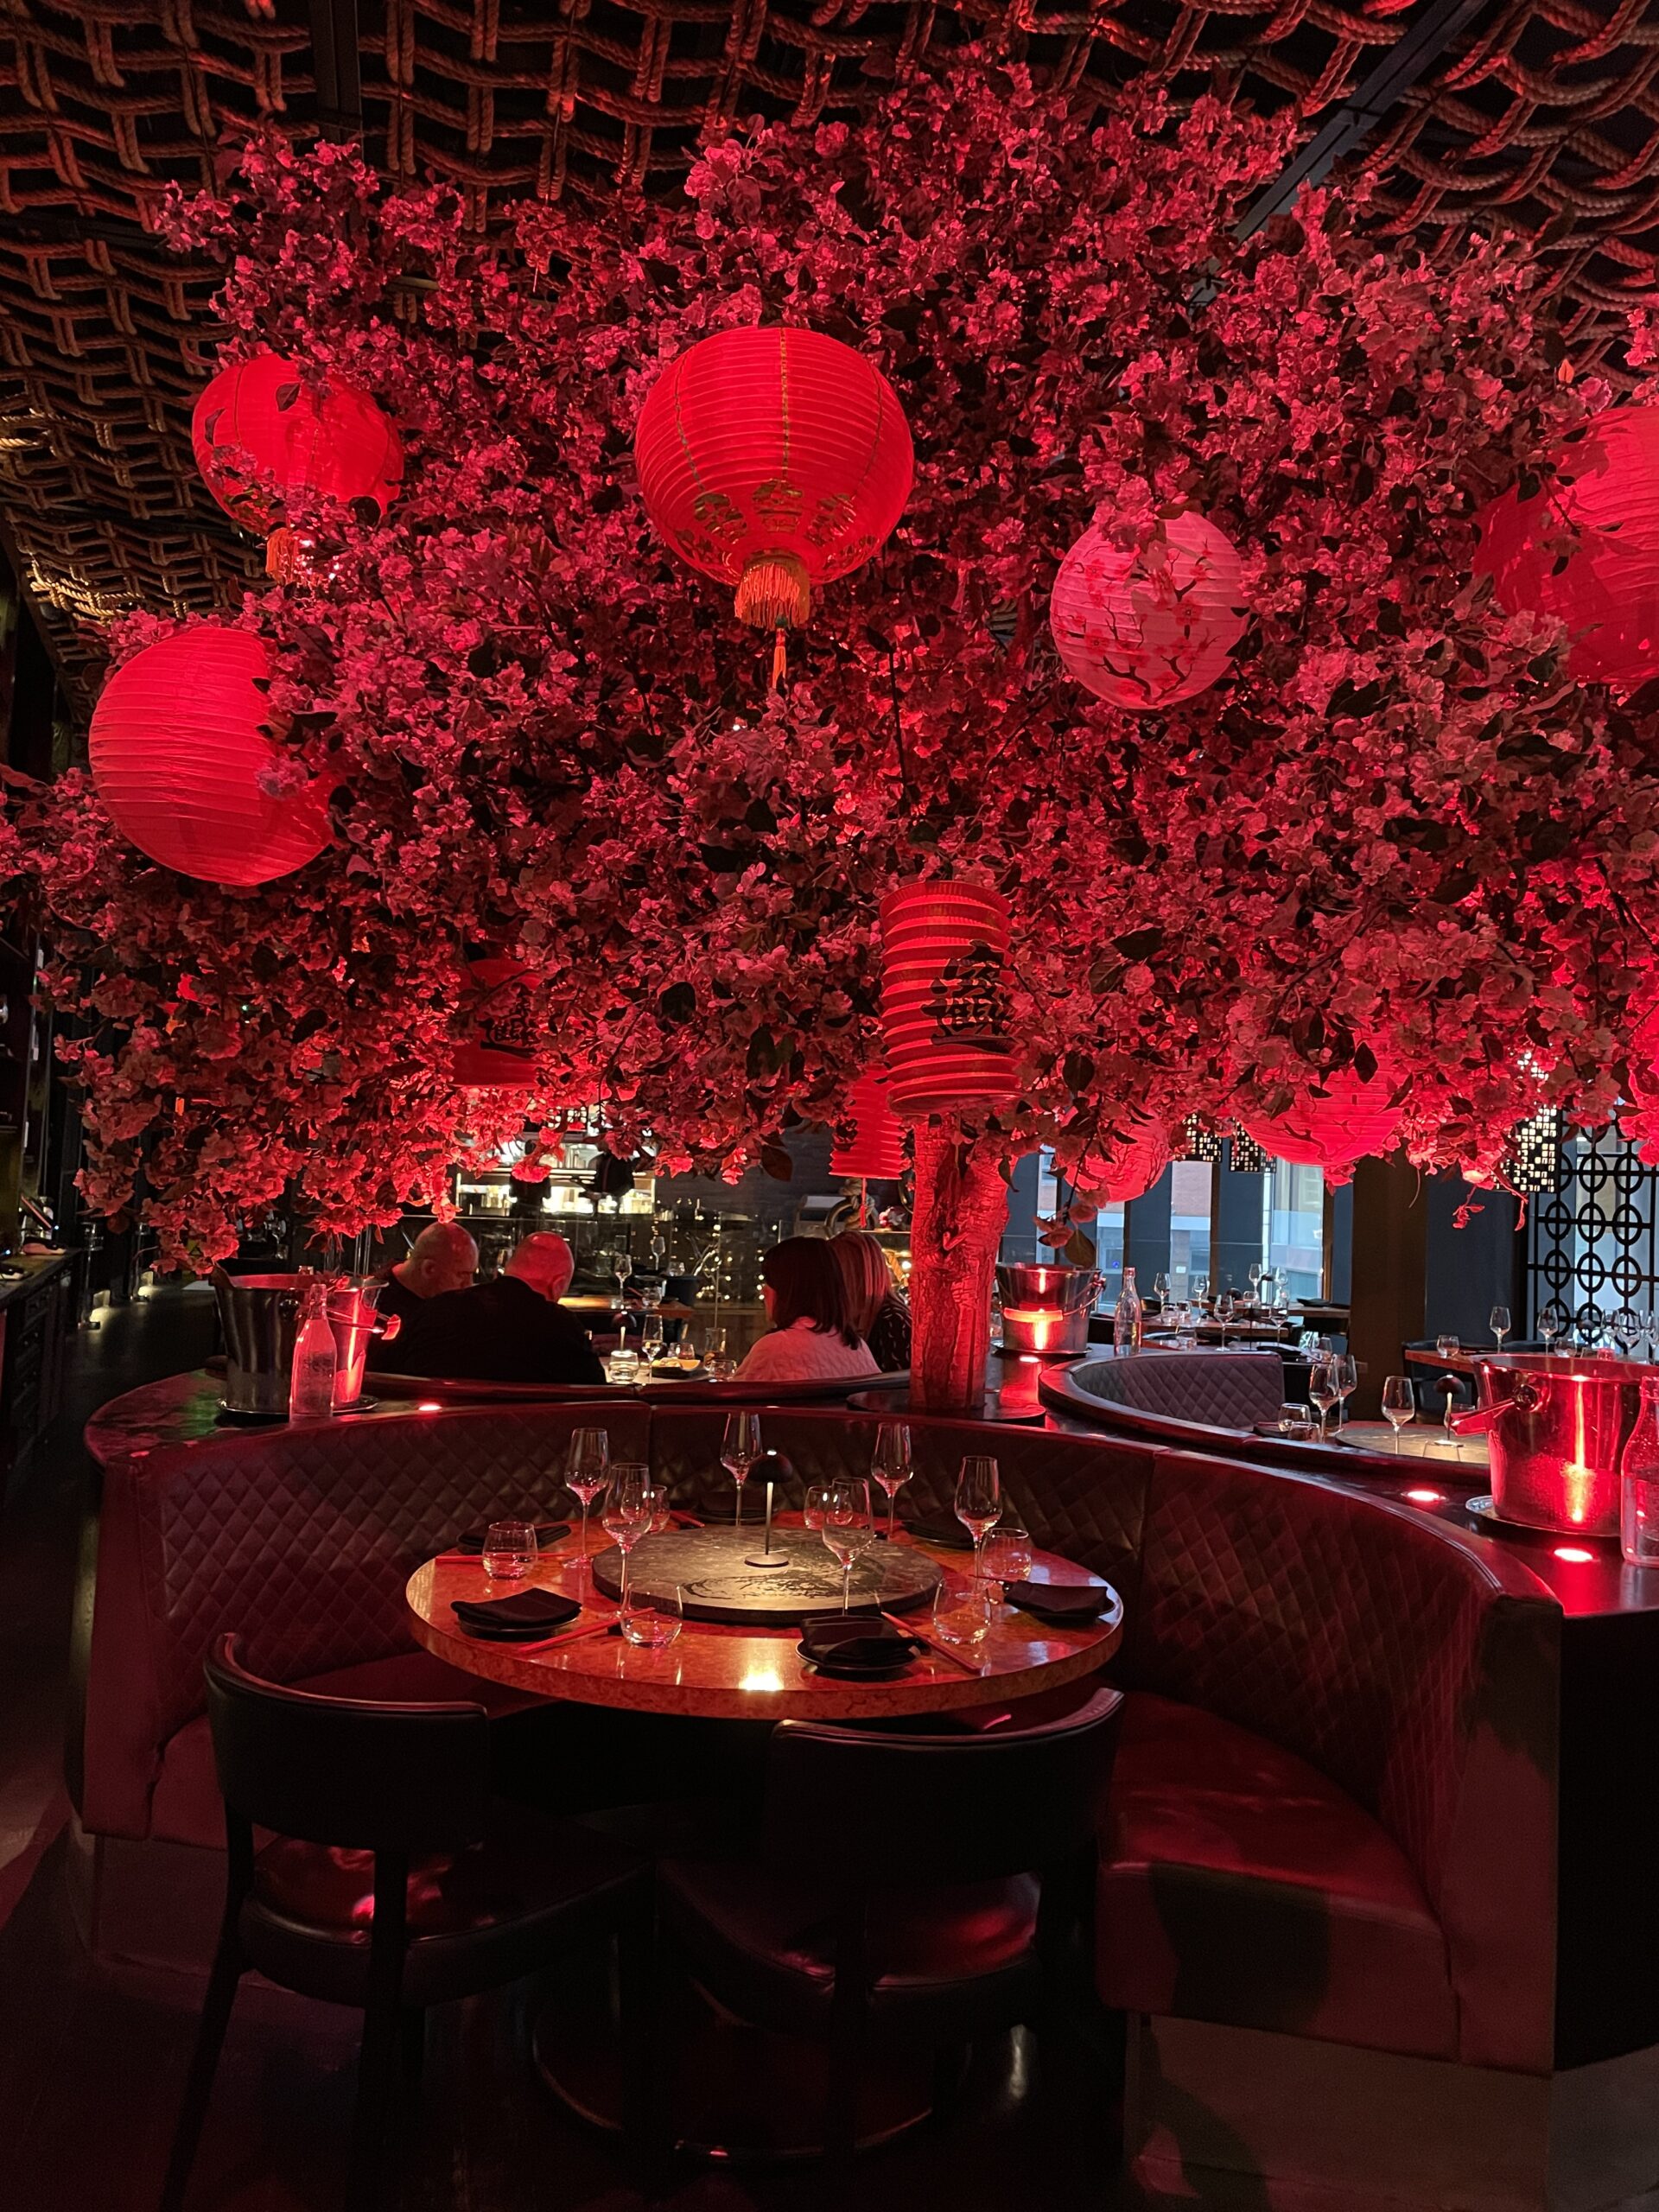 Tattu in manchester has been bathed in red for Valentine's Day. Credit: The Manc Group